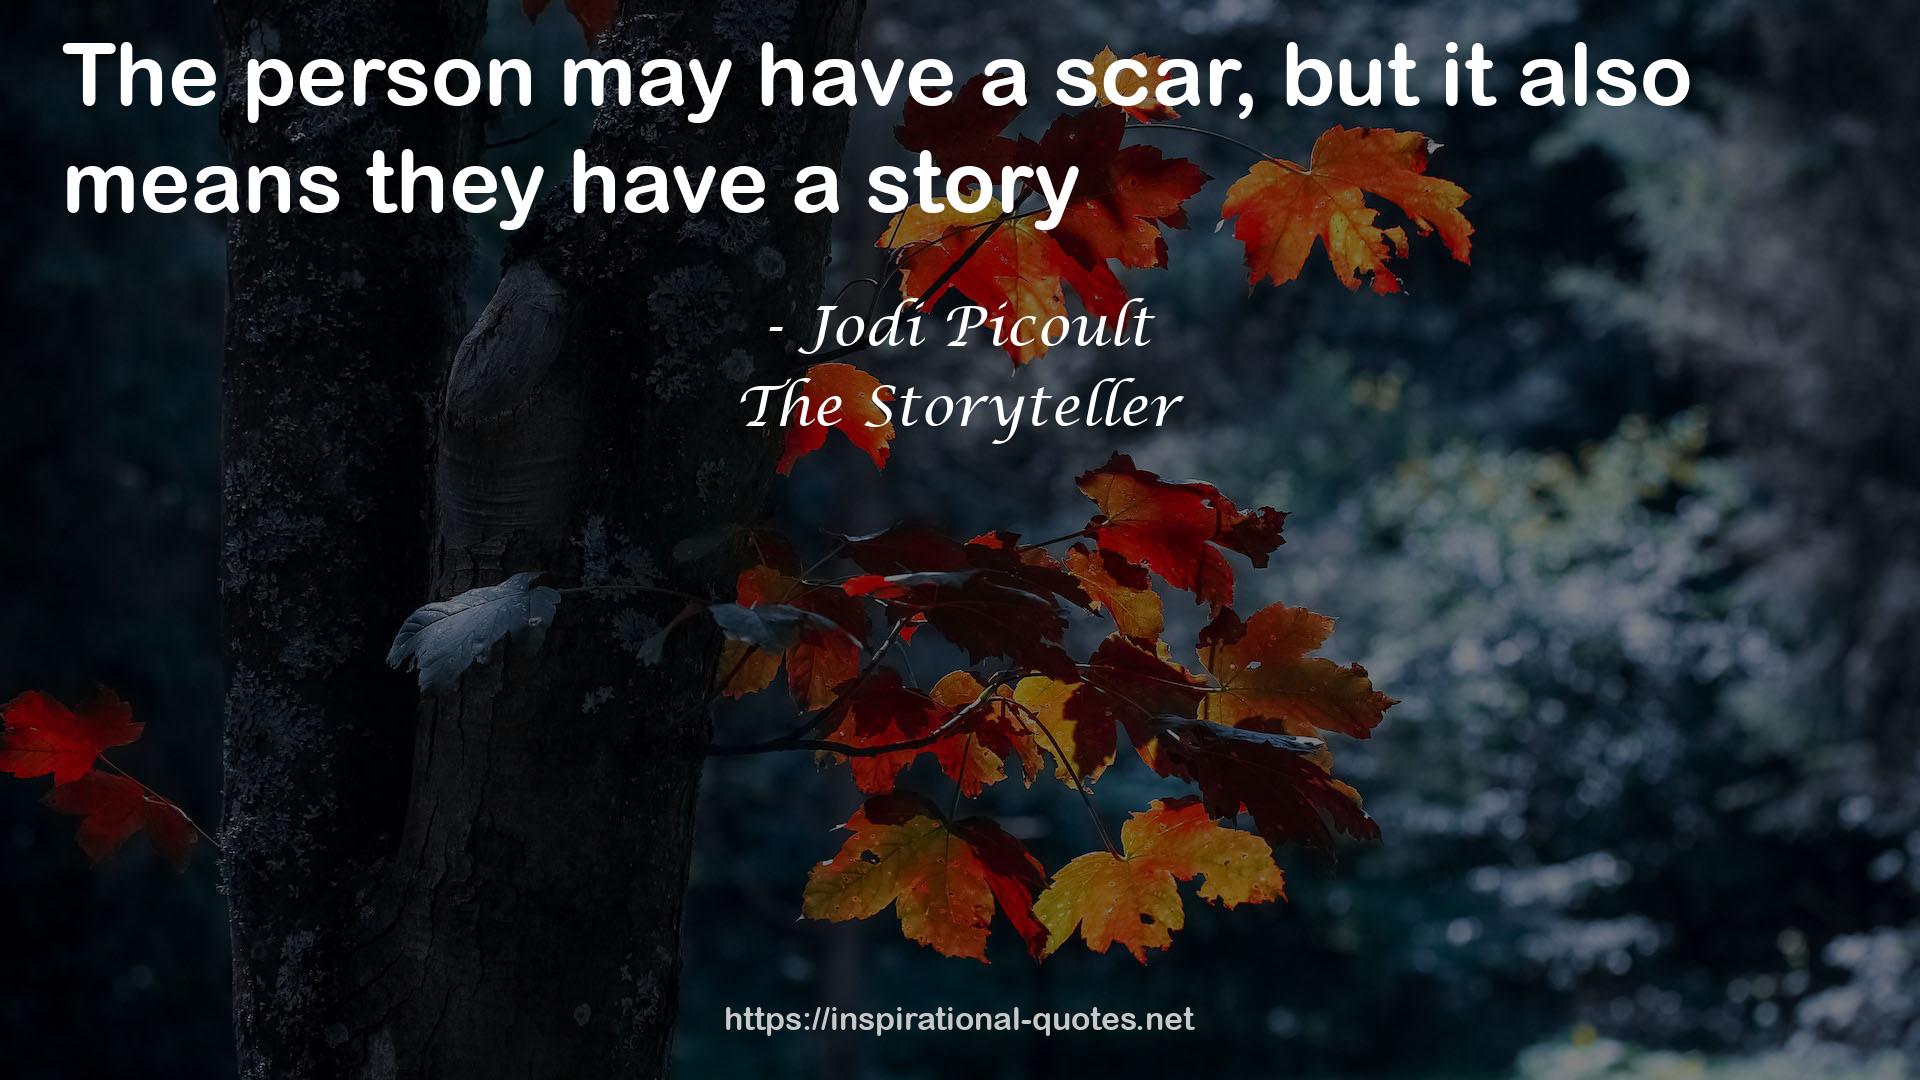 The Storyteller QUOTES